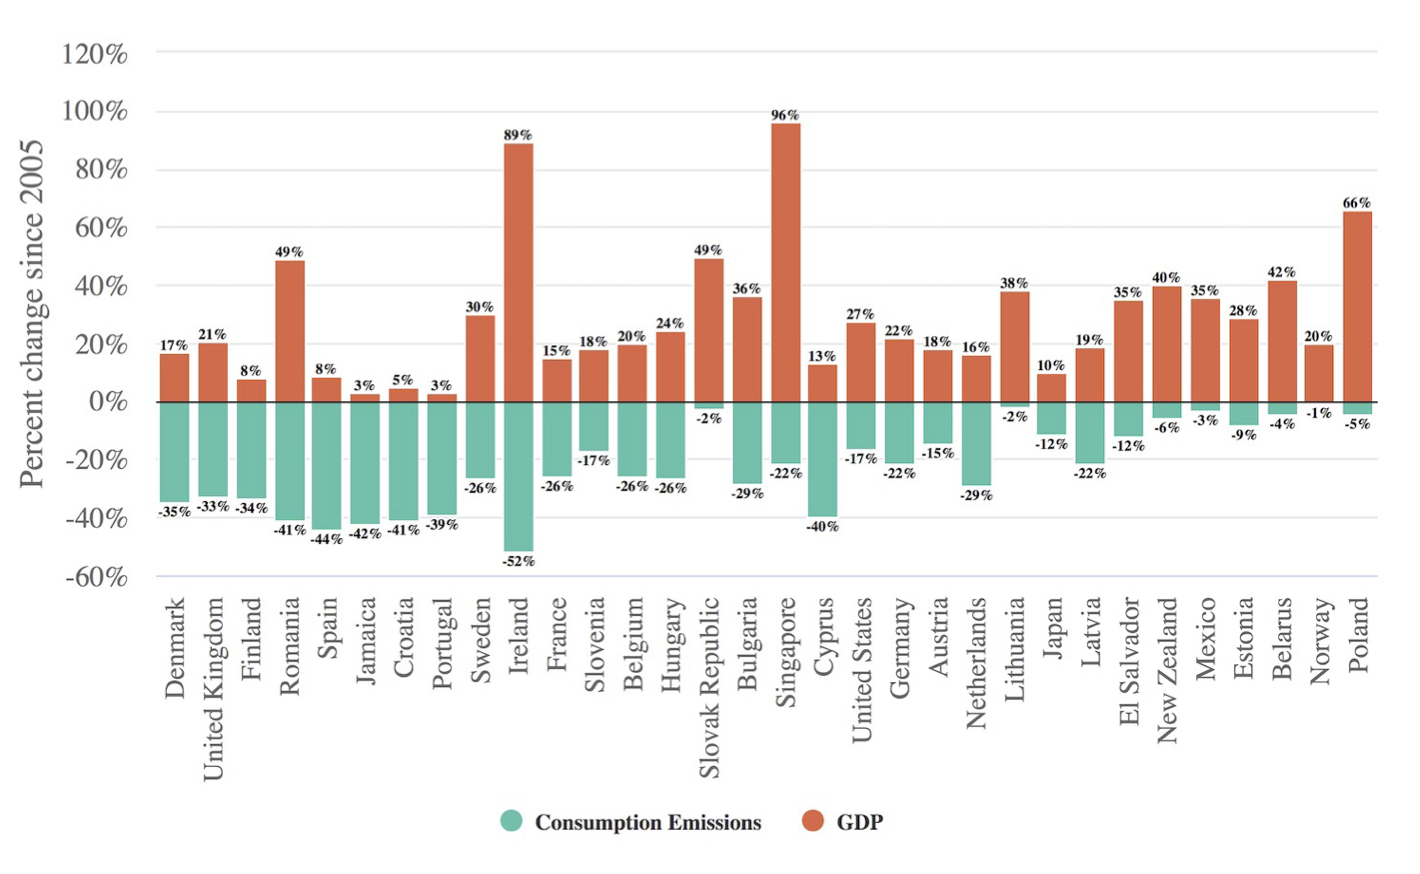 Figure 2. Decoupling of consumption-side emissions and GDP (2005-2019)